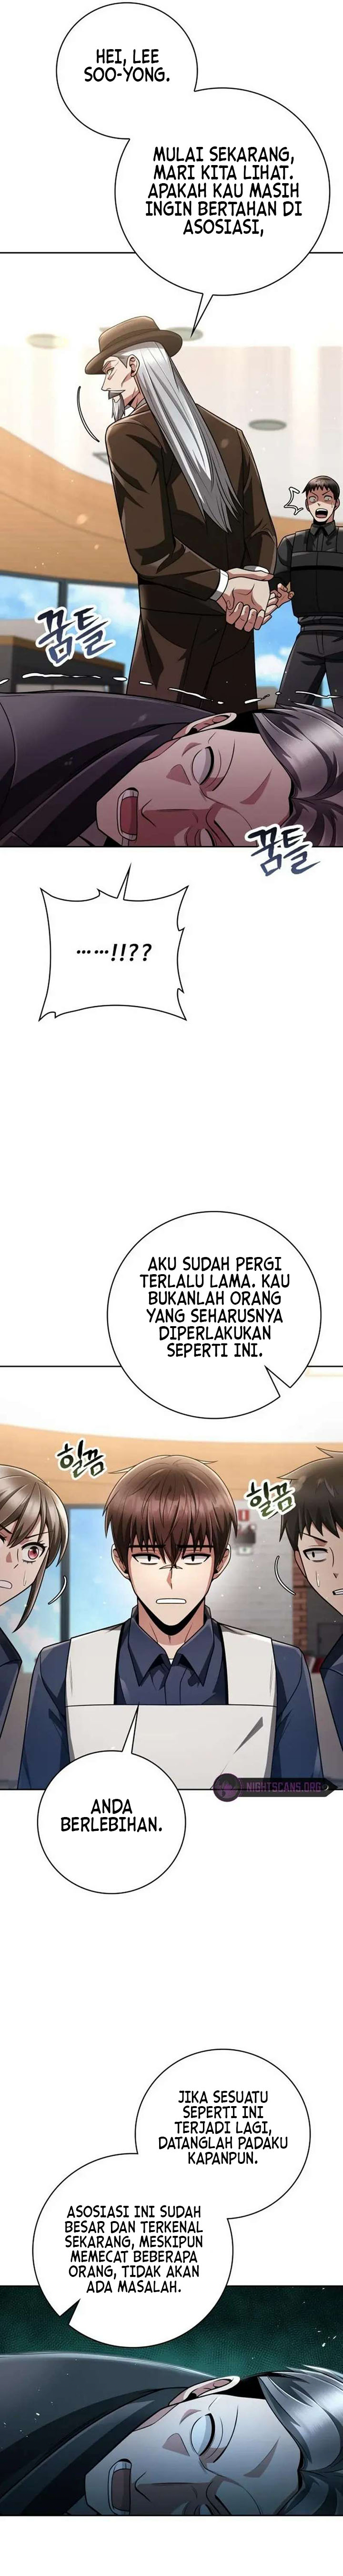 Dilarang COPAS - situs resmi www.mangacanblog.com - Komik clever cleaning life of the returned genius hunter 042 - chapter 42 43 Indonesia clever cleaning life of the returned genius hunter 042 - chapter 42 Terbaru 26|Baca Manga Komik Indonesia|Mangacan